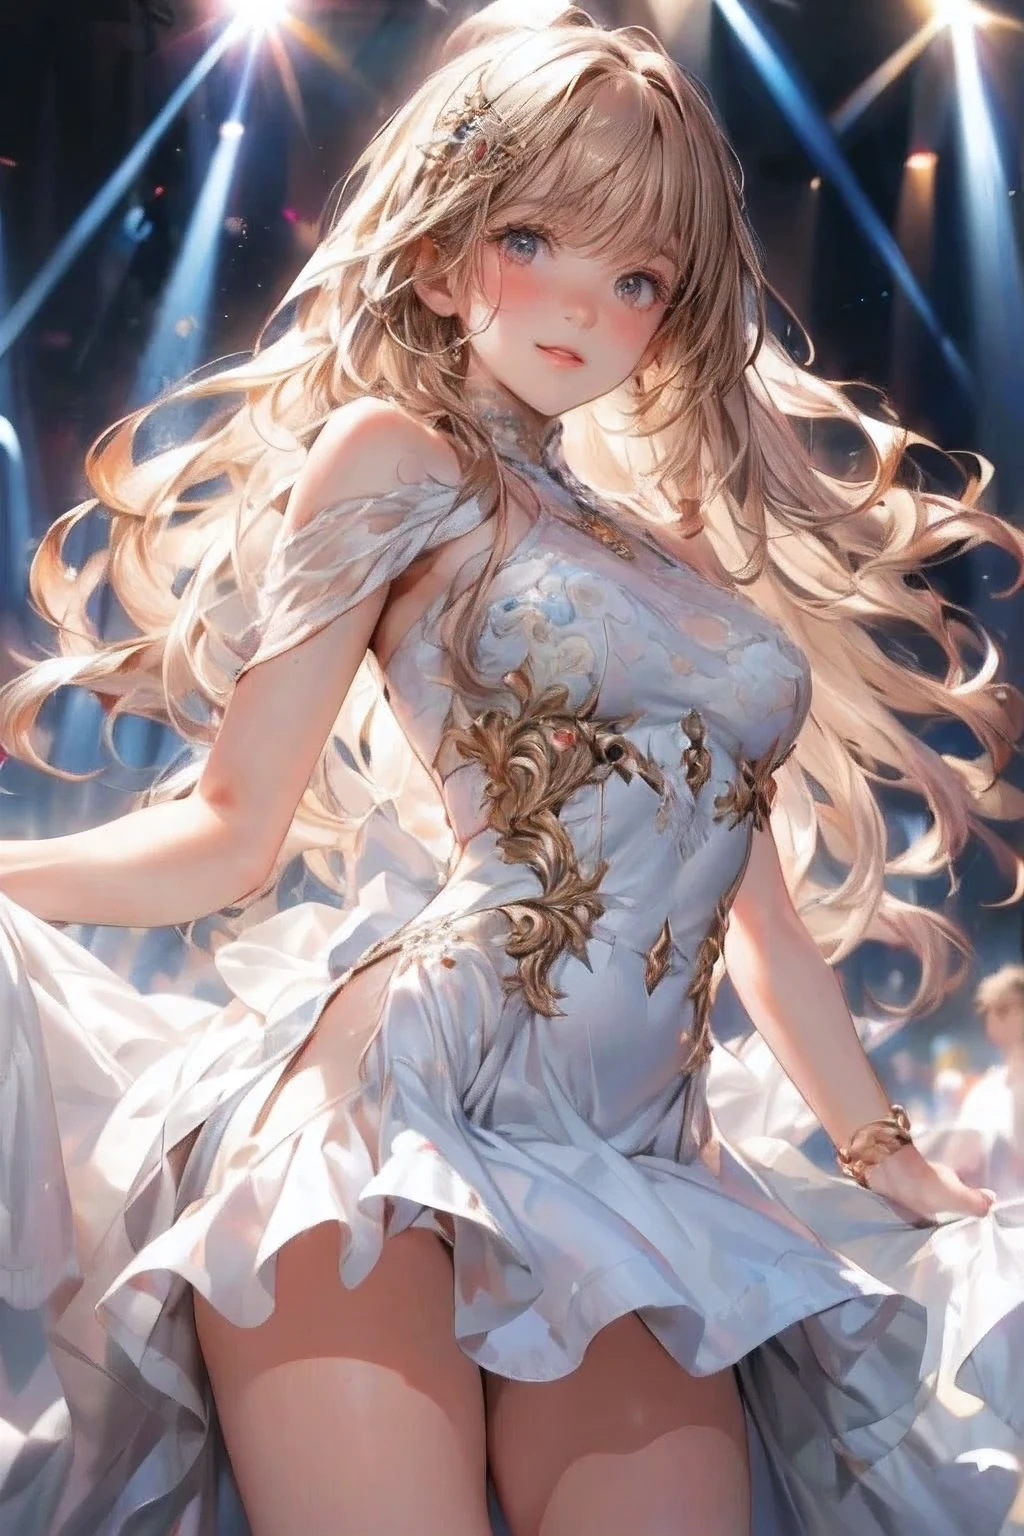 masterpiece:1.2, highest quality, 16k, highres, ultra-realistic, photorealistic:1.37, beautiful detailed:1.2, cute girl, standing in Fashion show, fashion model Striking a pose while standing elegantly on the runway, beautiful delicate artistic avant-garde revealing dress, gently smile, beautiful delicate(hair, face, long eyelash, eyes, pupils, lips, knee, anklet, dress), sparkling eyes, shining rosy lips, blushed cheek, through bangs,